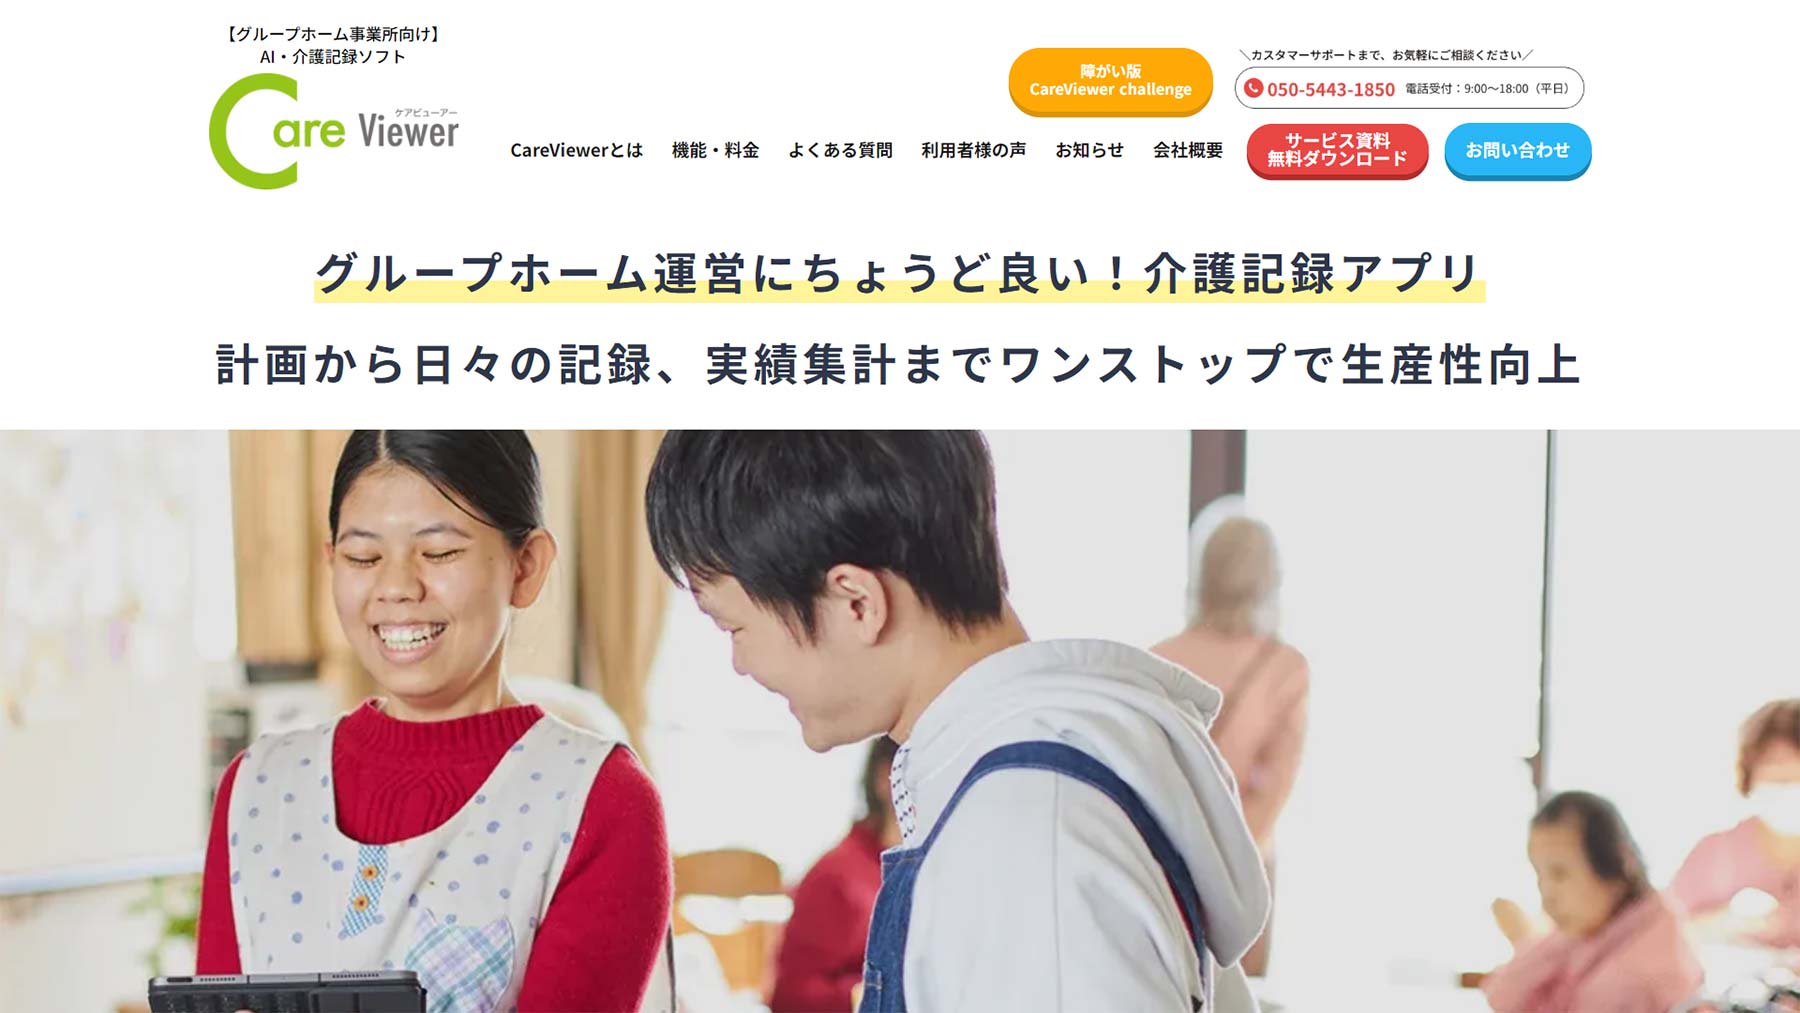 CareViewer公式Webサイト